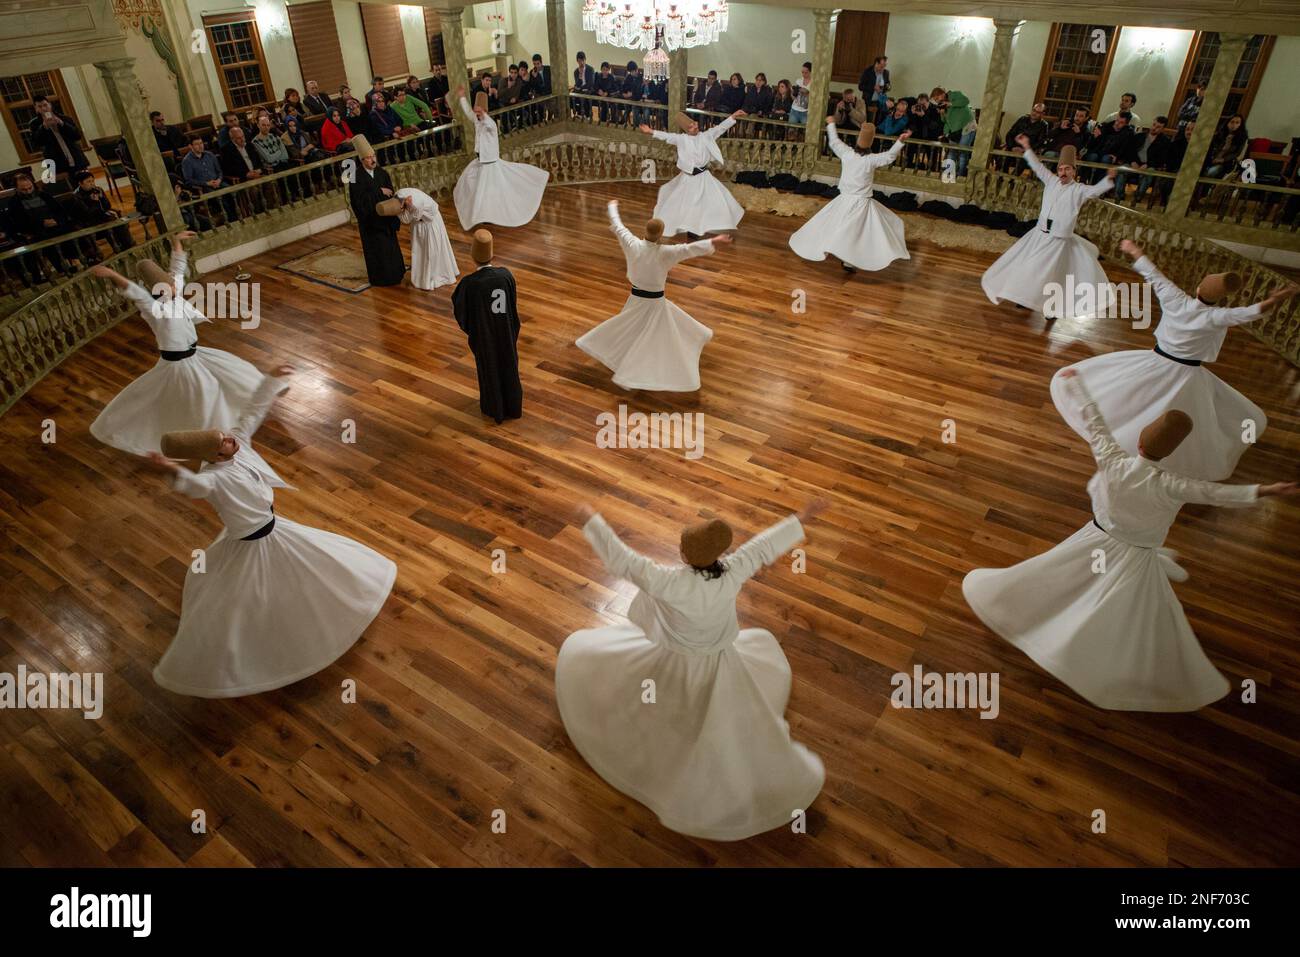 A group performing the Whirling Dervish Show dance to glorify God and seek spiritual perfection Stock Photo